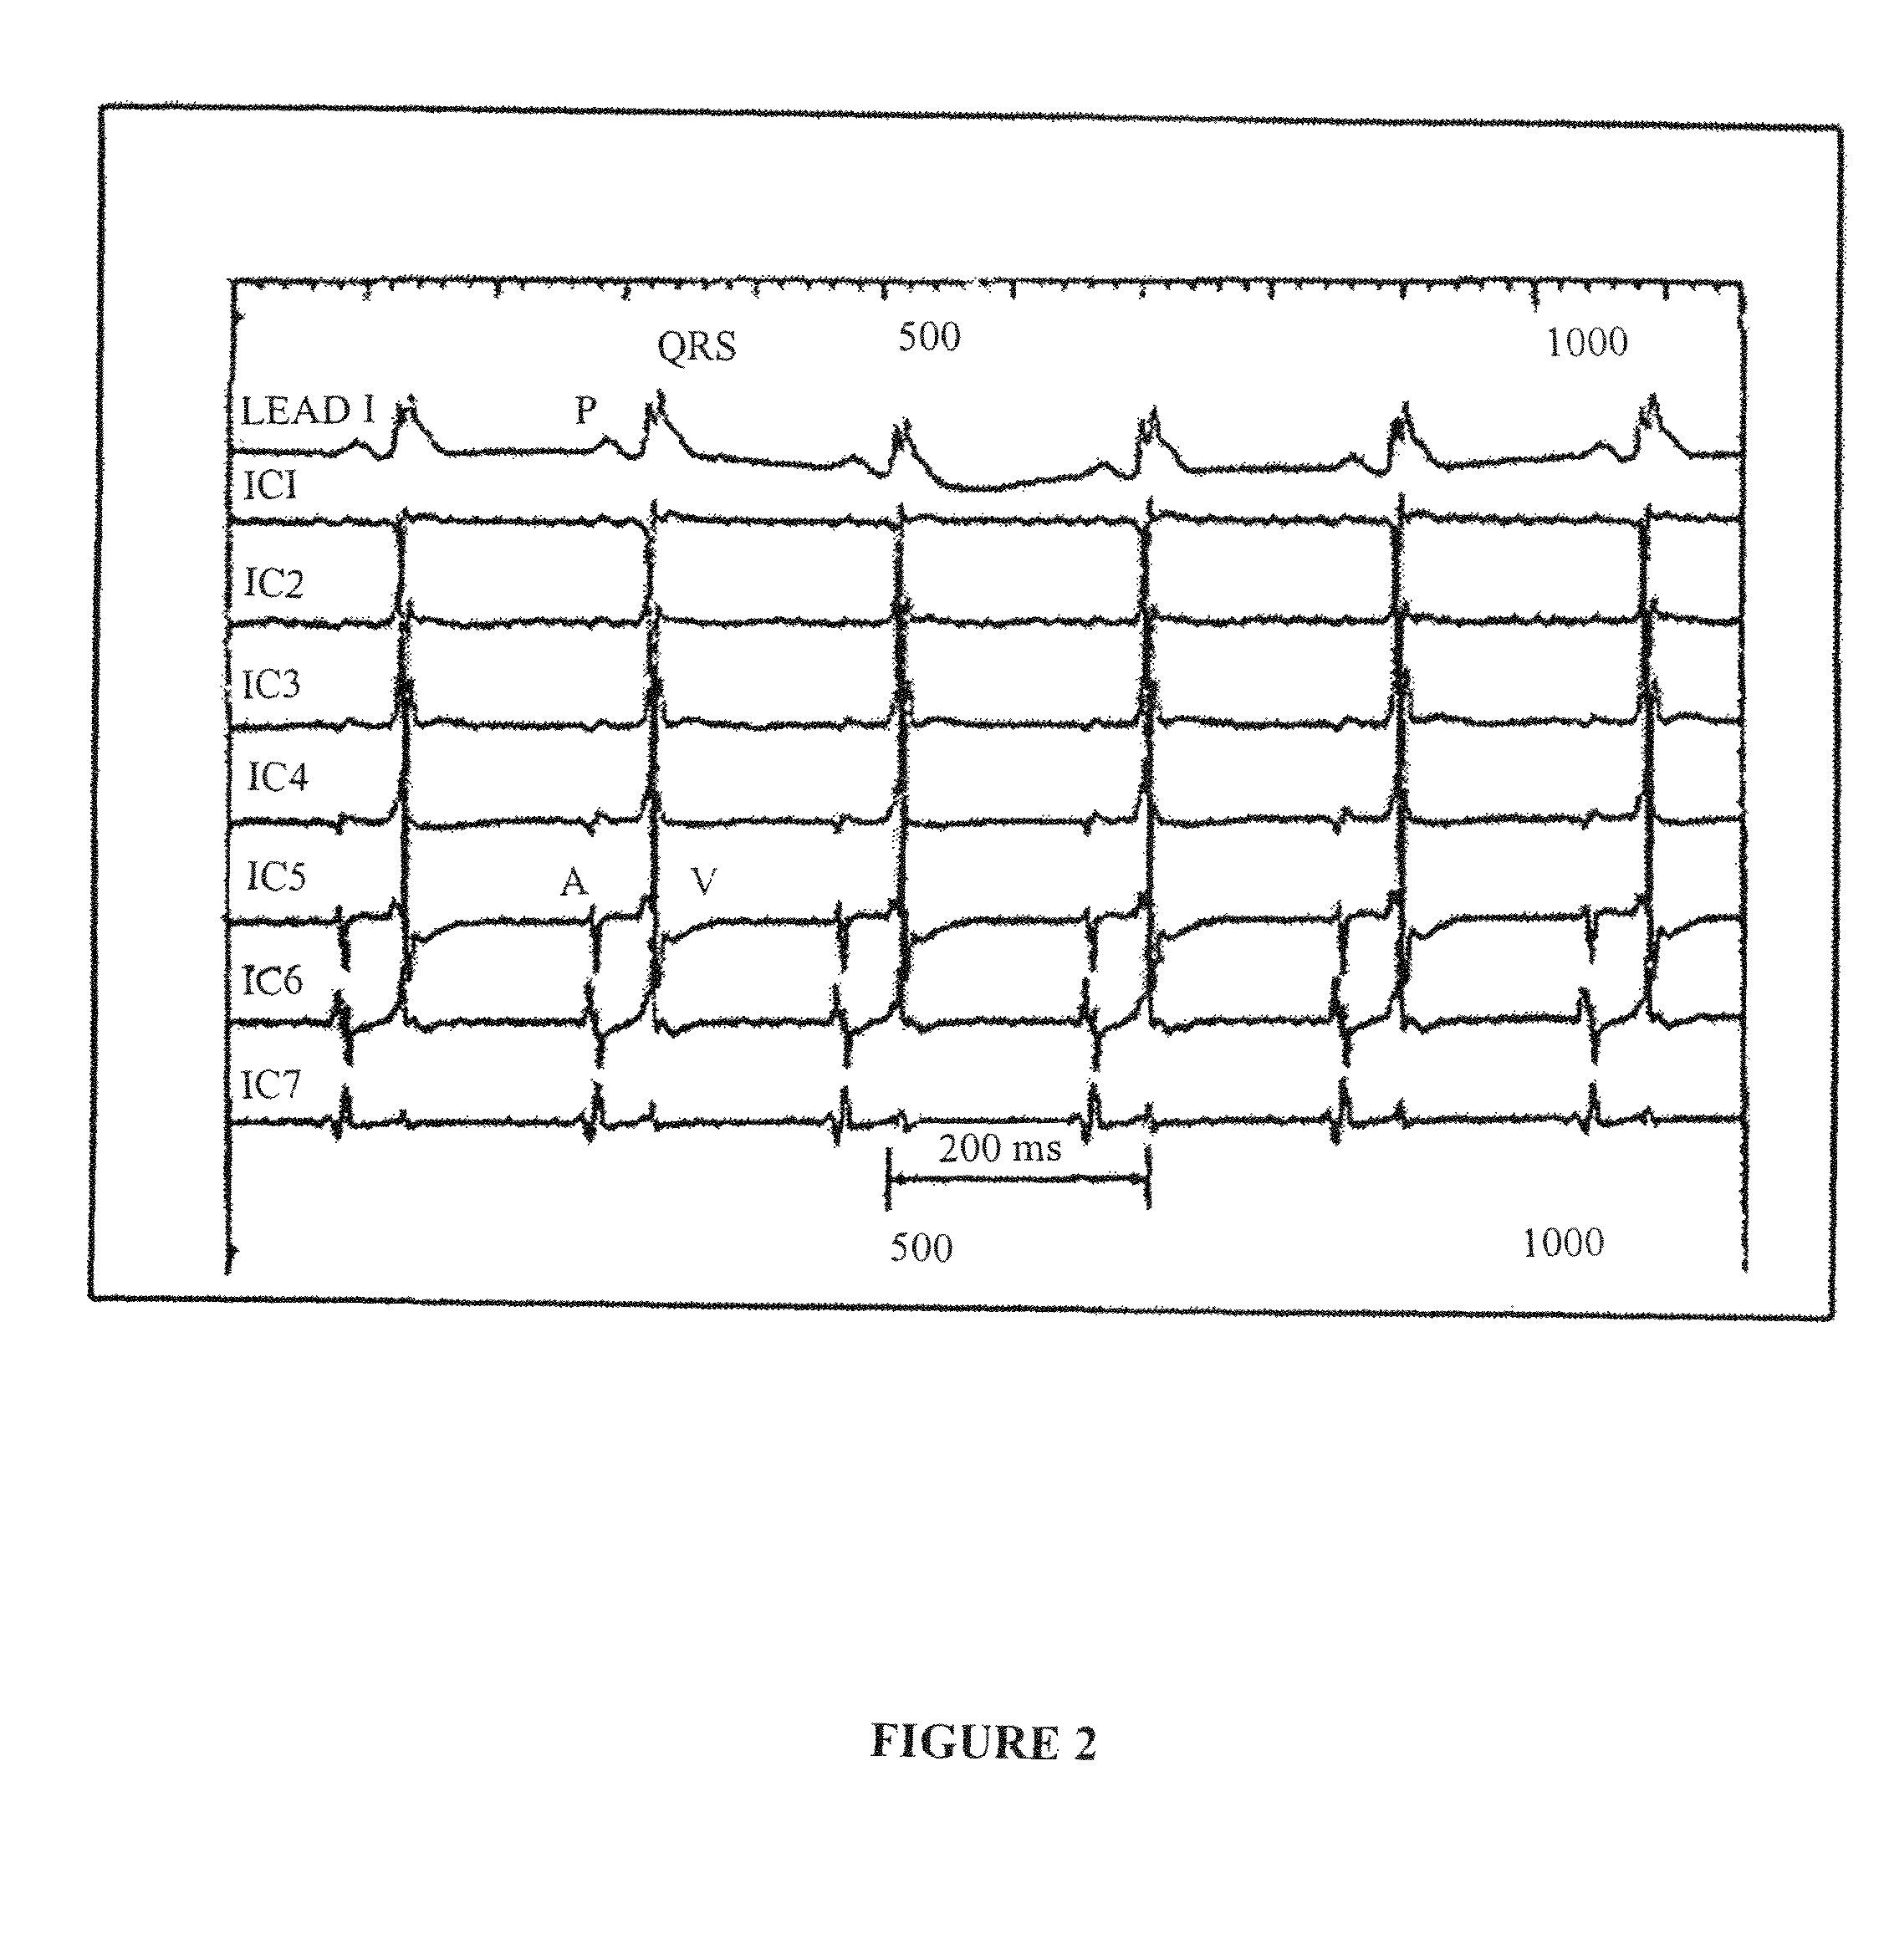 Electrocardiogram reconstruction from implanted device electrograms